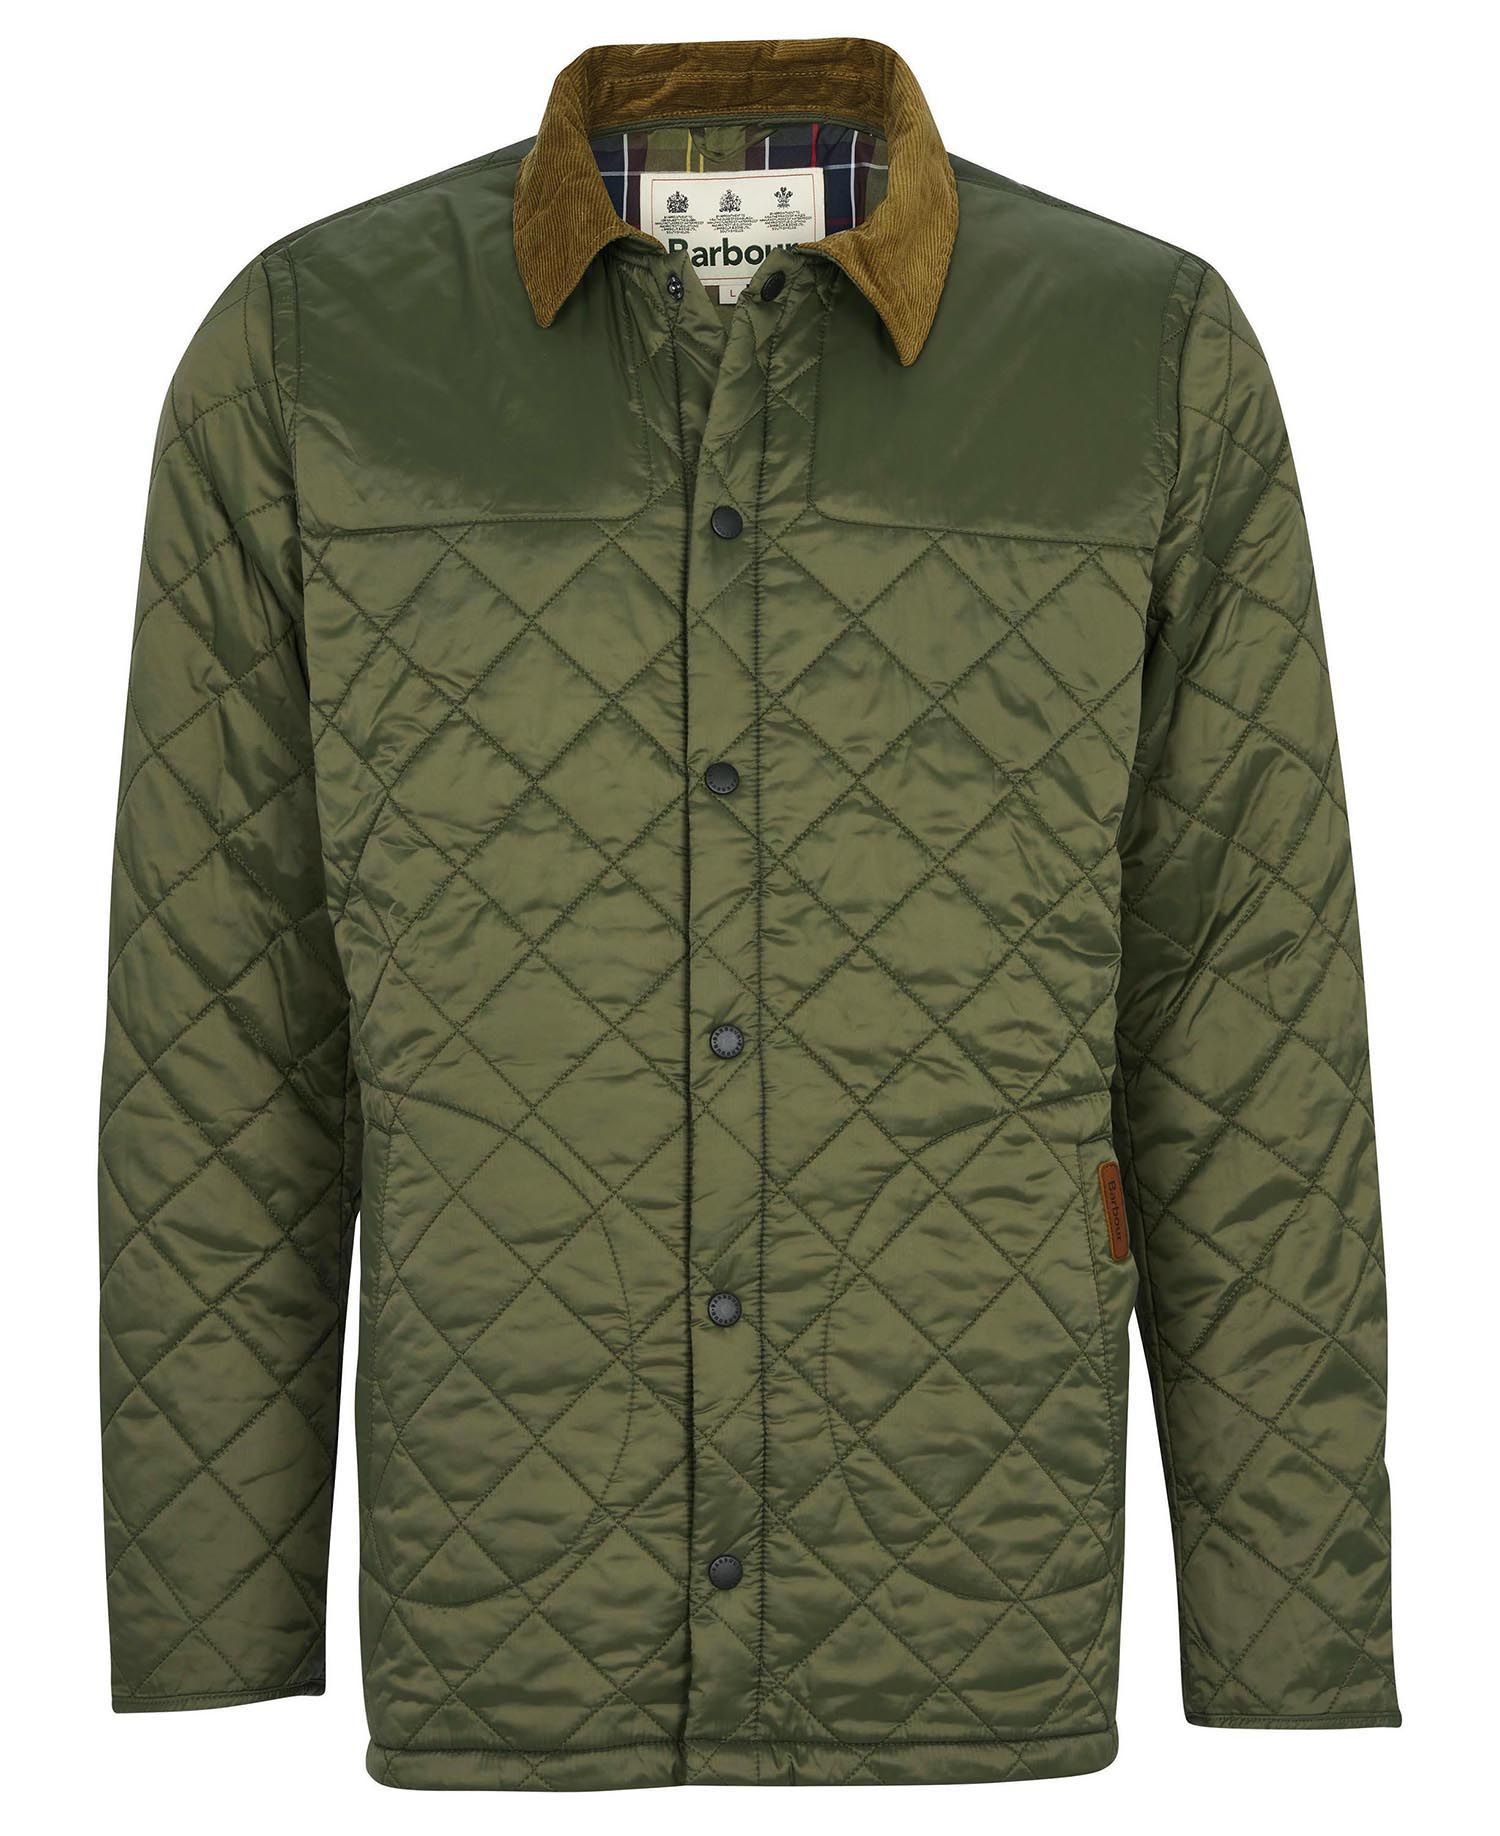 Barbour Thornhill Quilted Jacket - Olive SeriousCountrySports.com